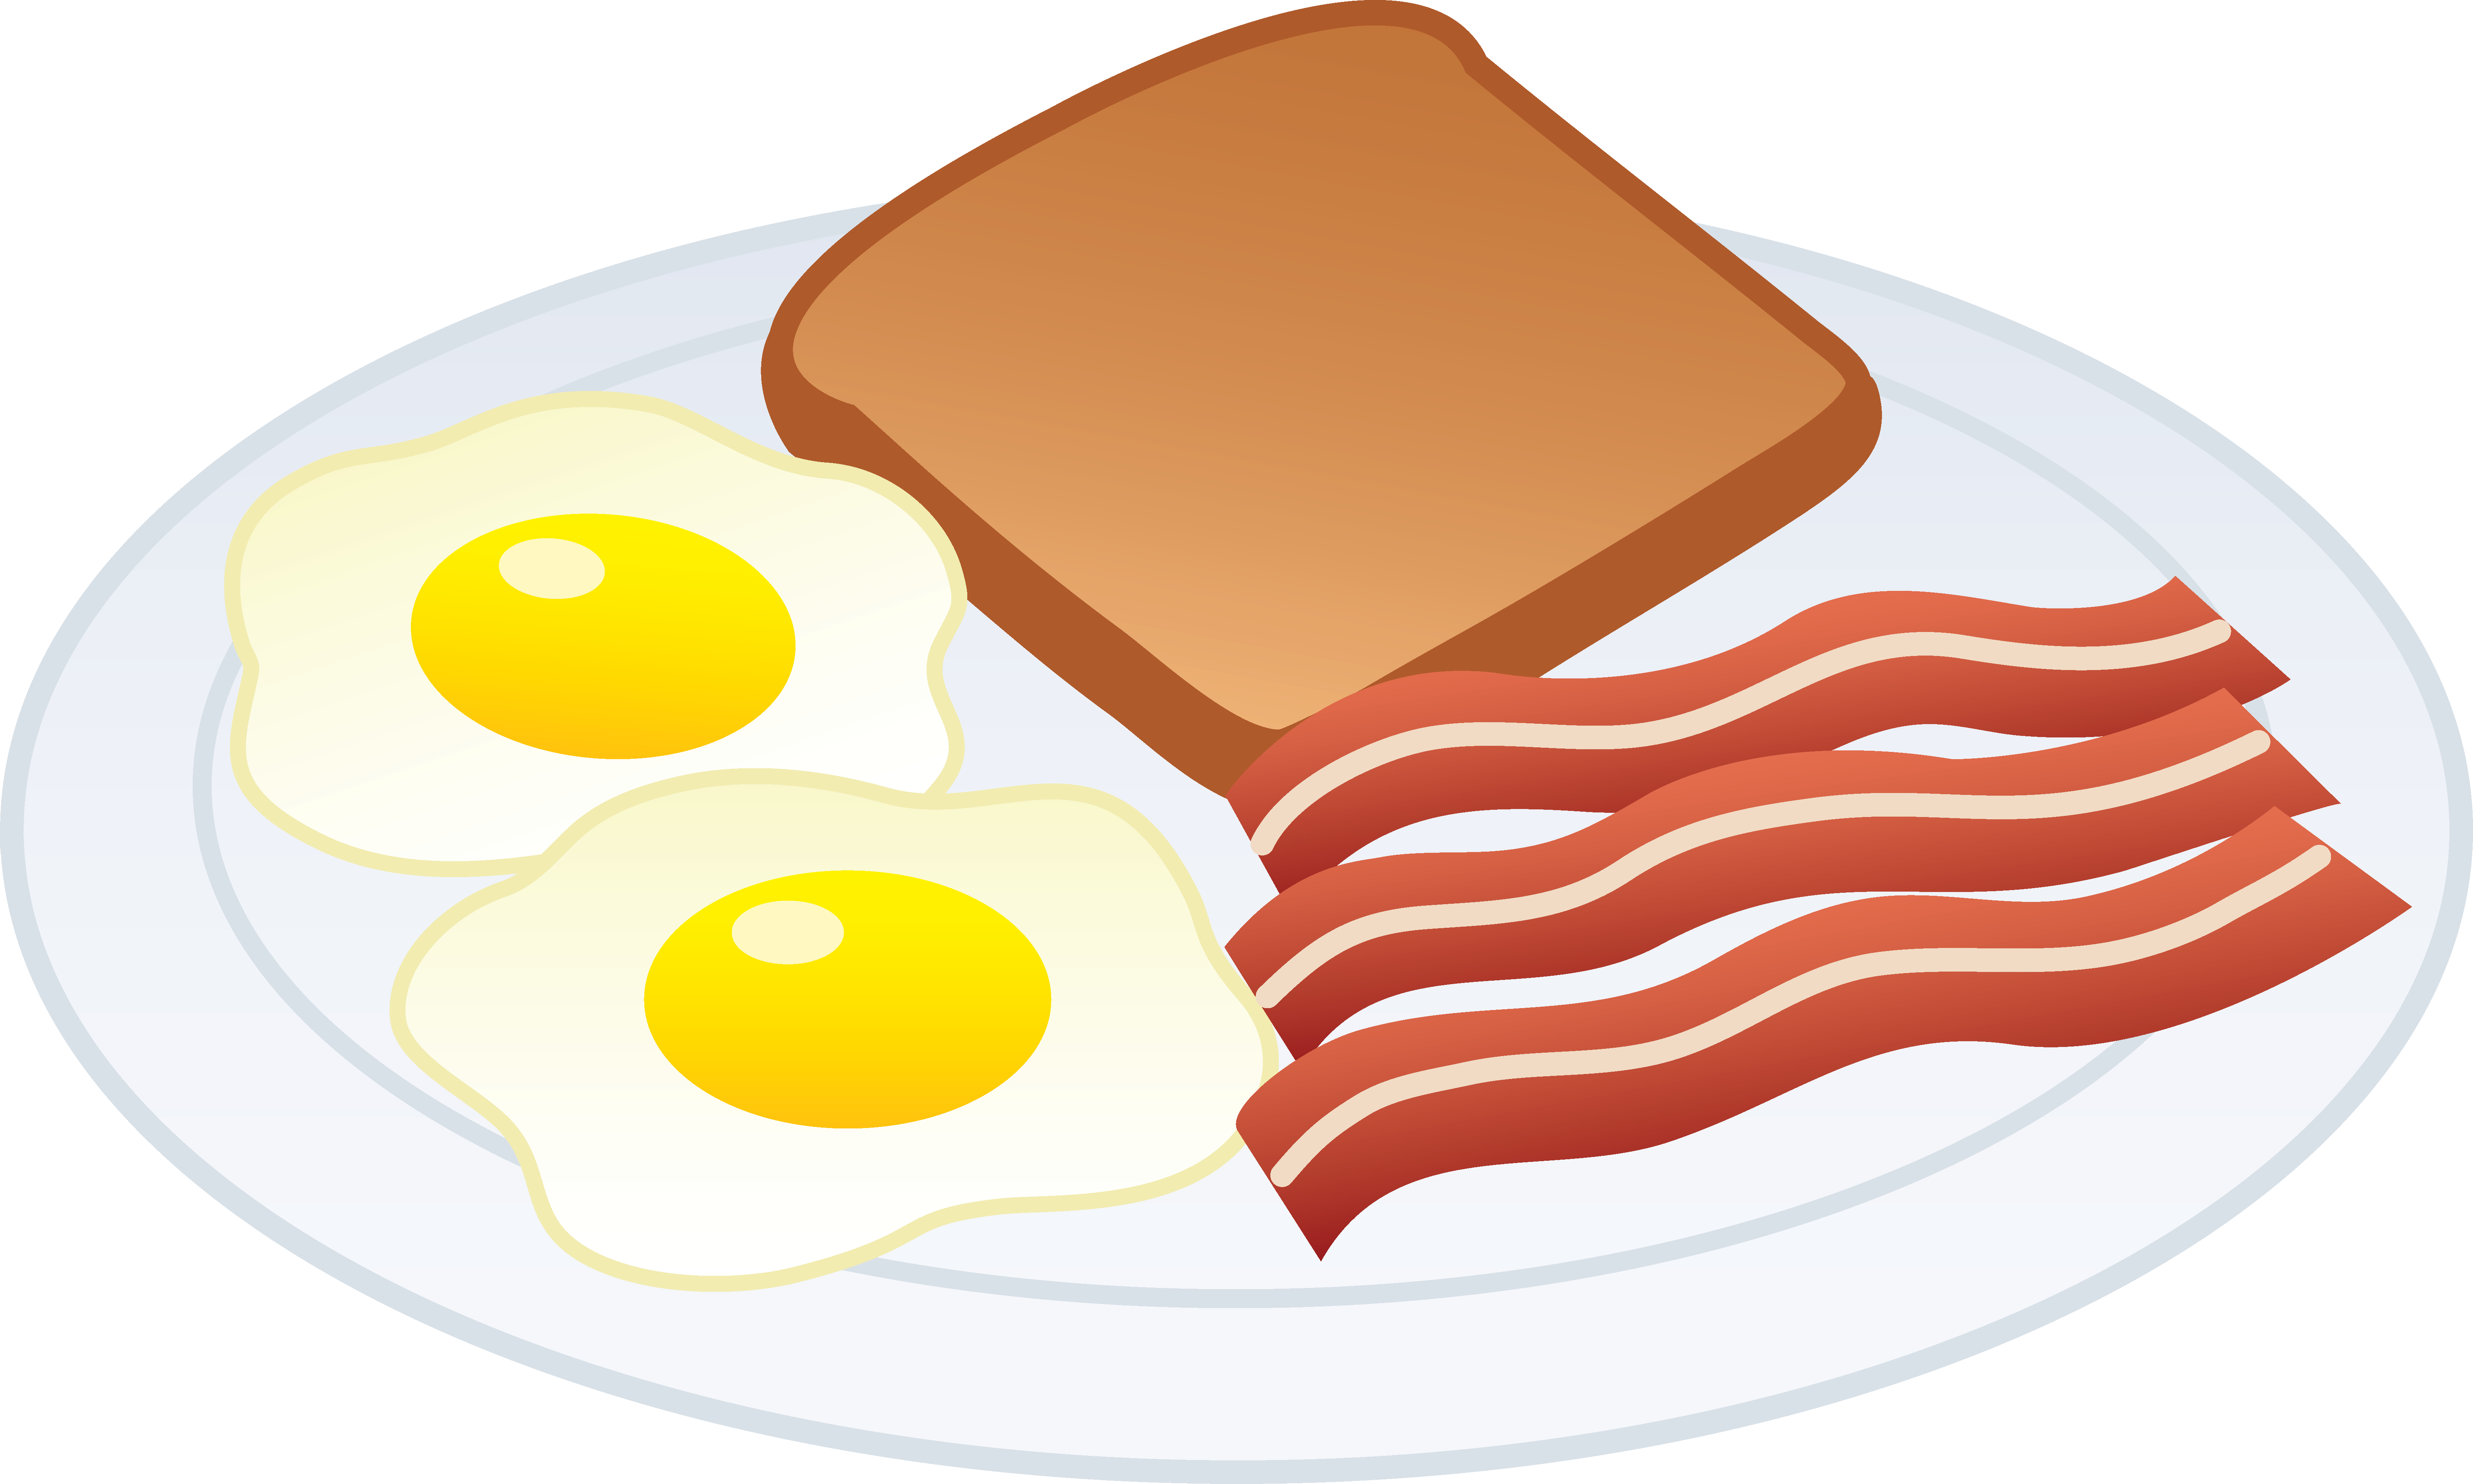 Plate of bacon . Dishes clipart bhojan